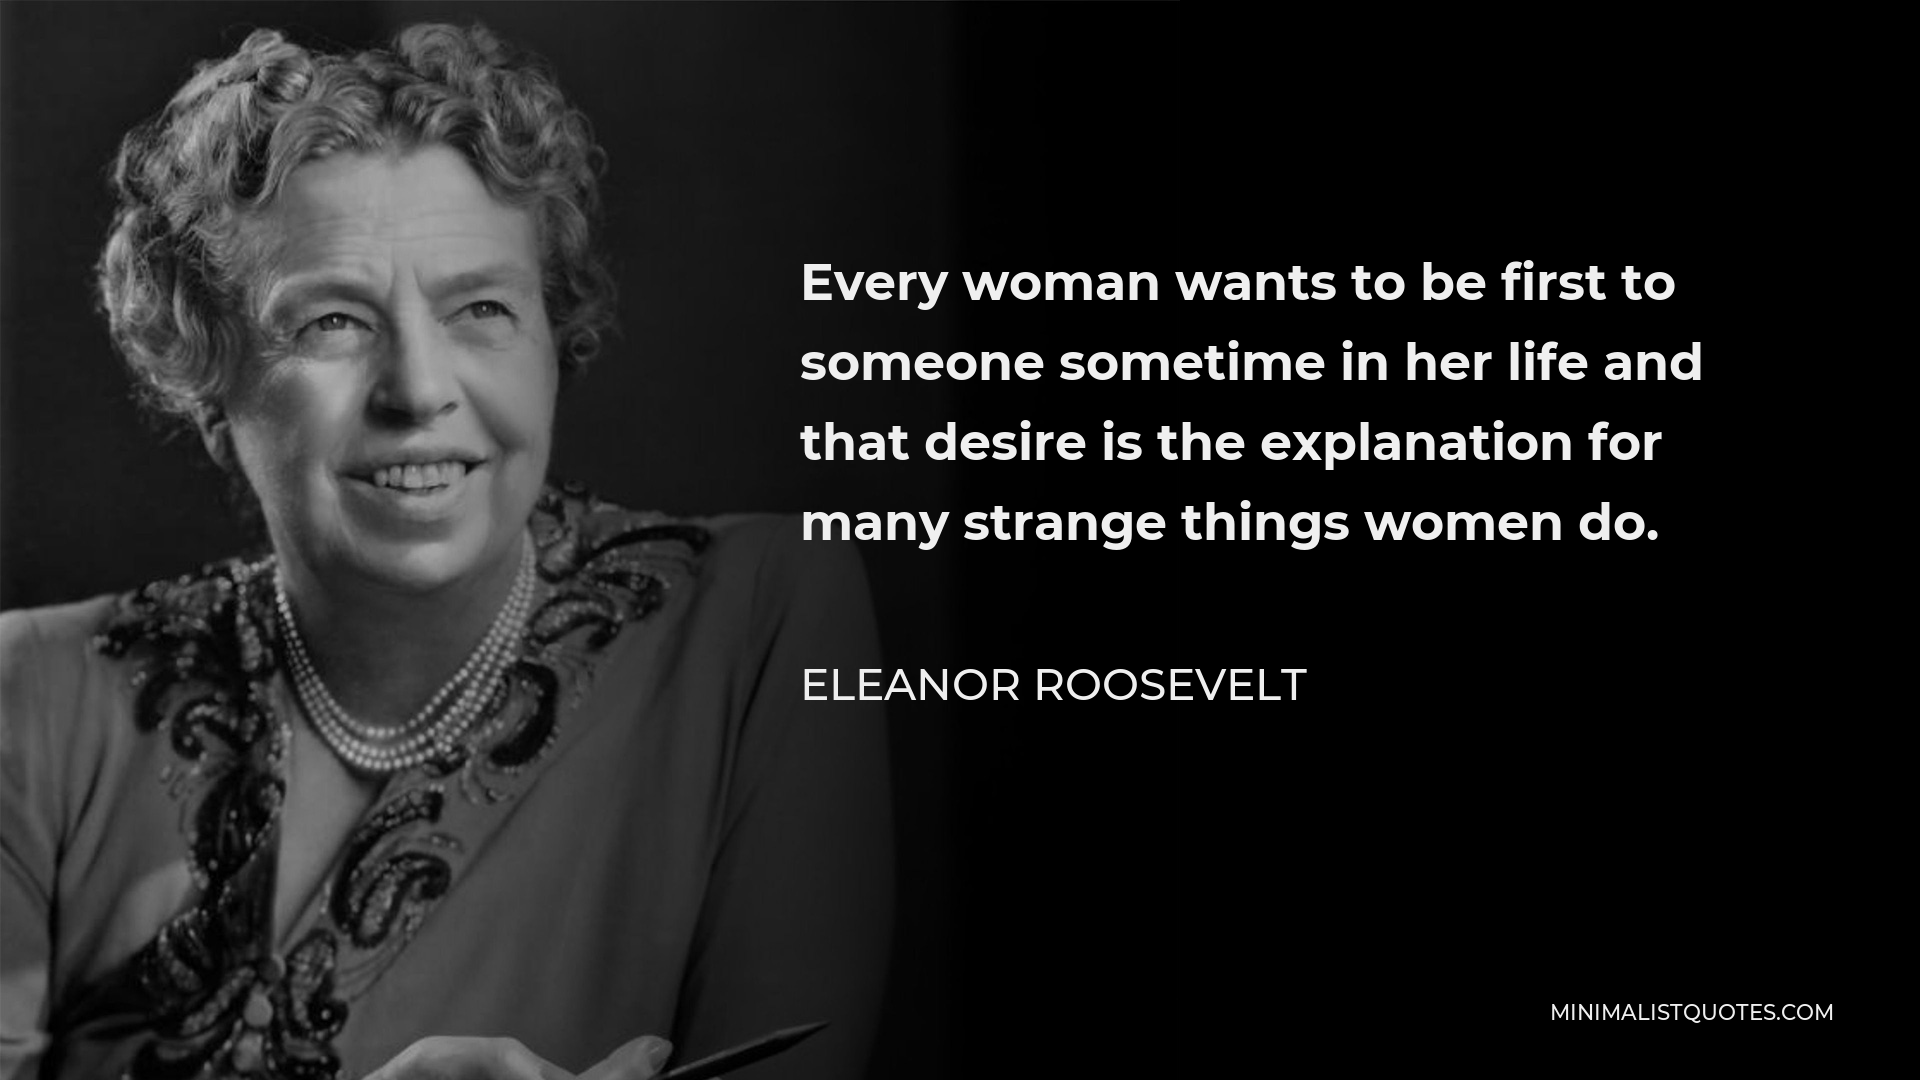 Eleanor Roosevelt Quote - Every woman wants to be first to someone sometime in her life and that desire is the explanation for many strange things women do.